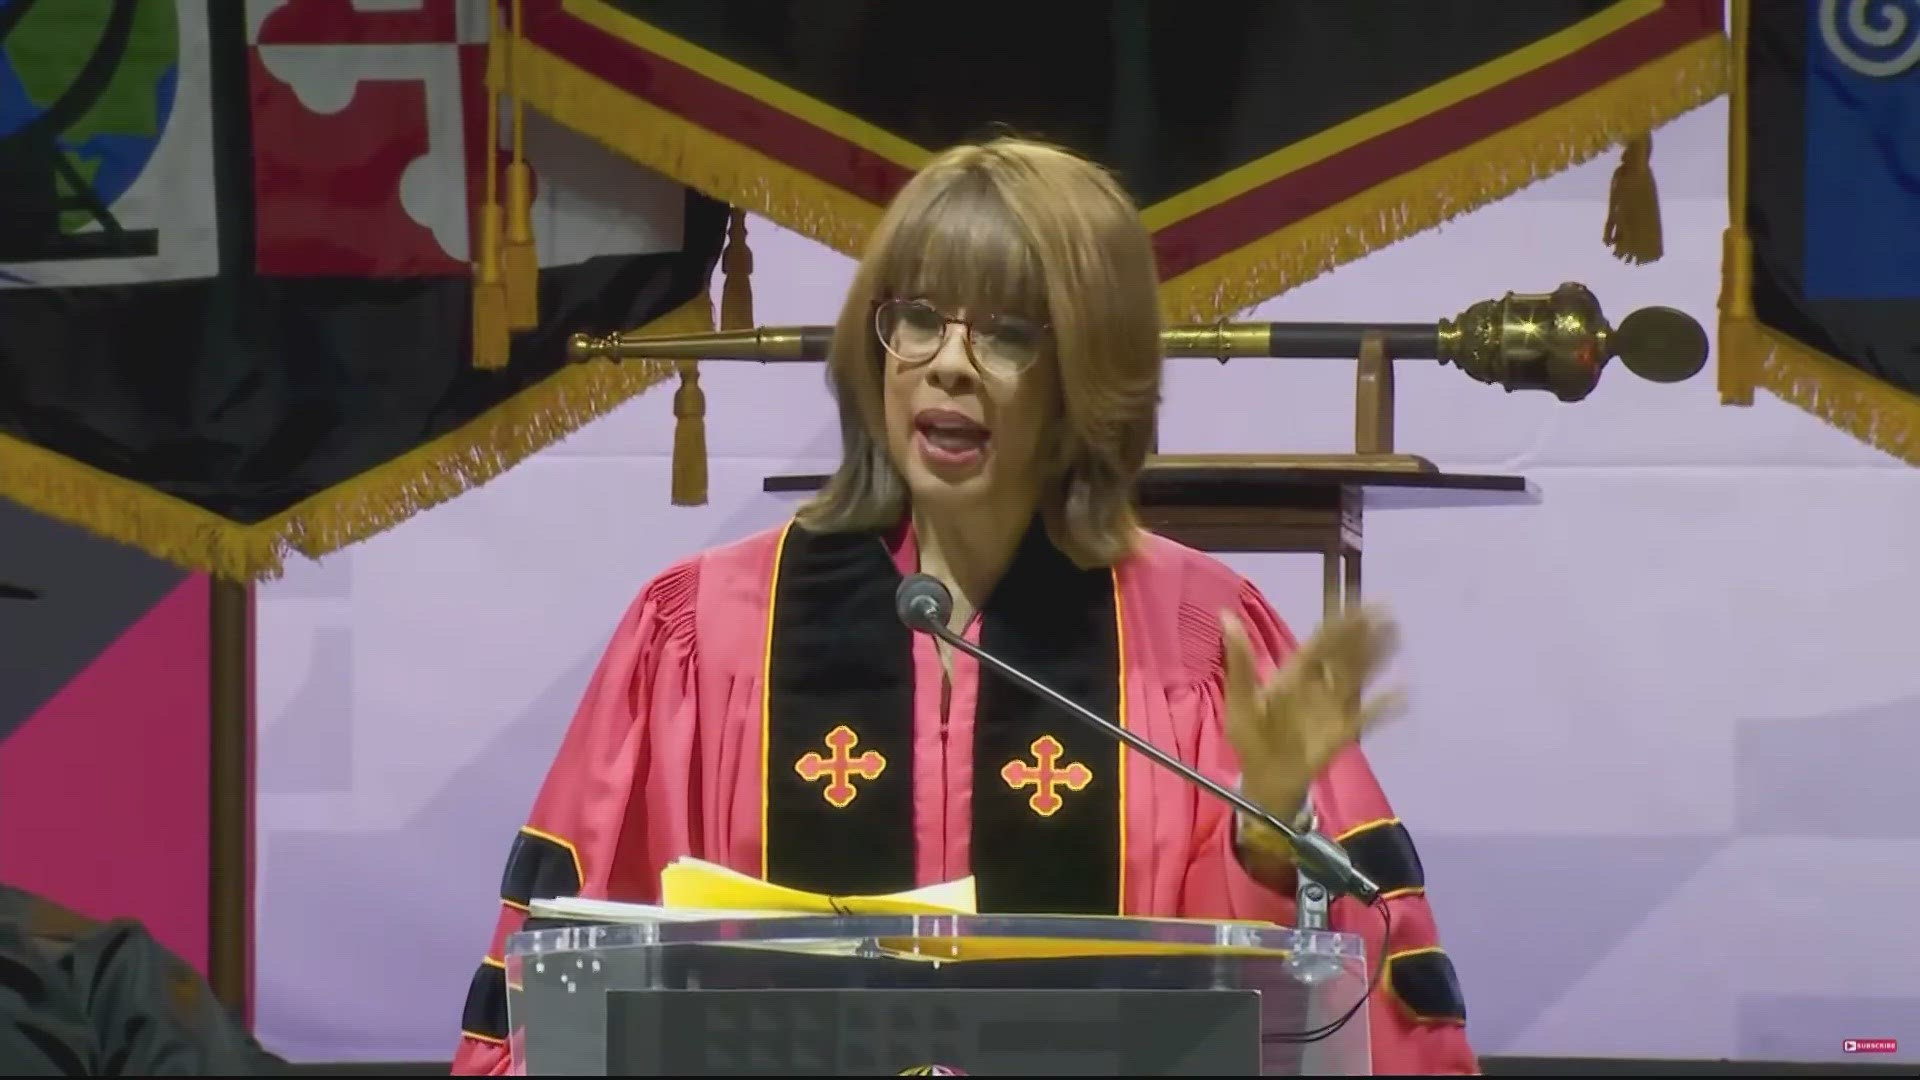 Class of 74's Gayle King was nervous about giving her first commencement speech. She had no reason to be.